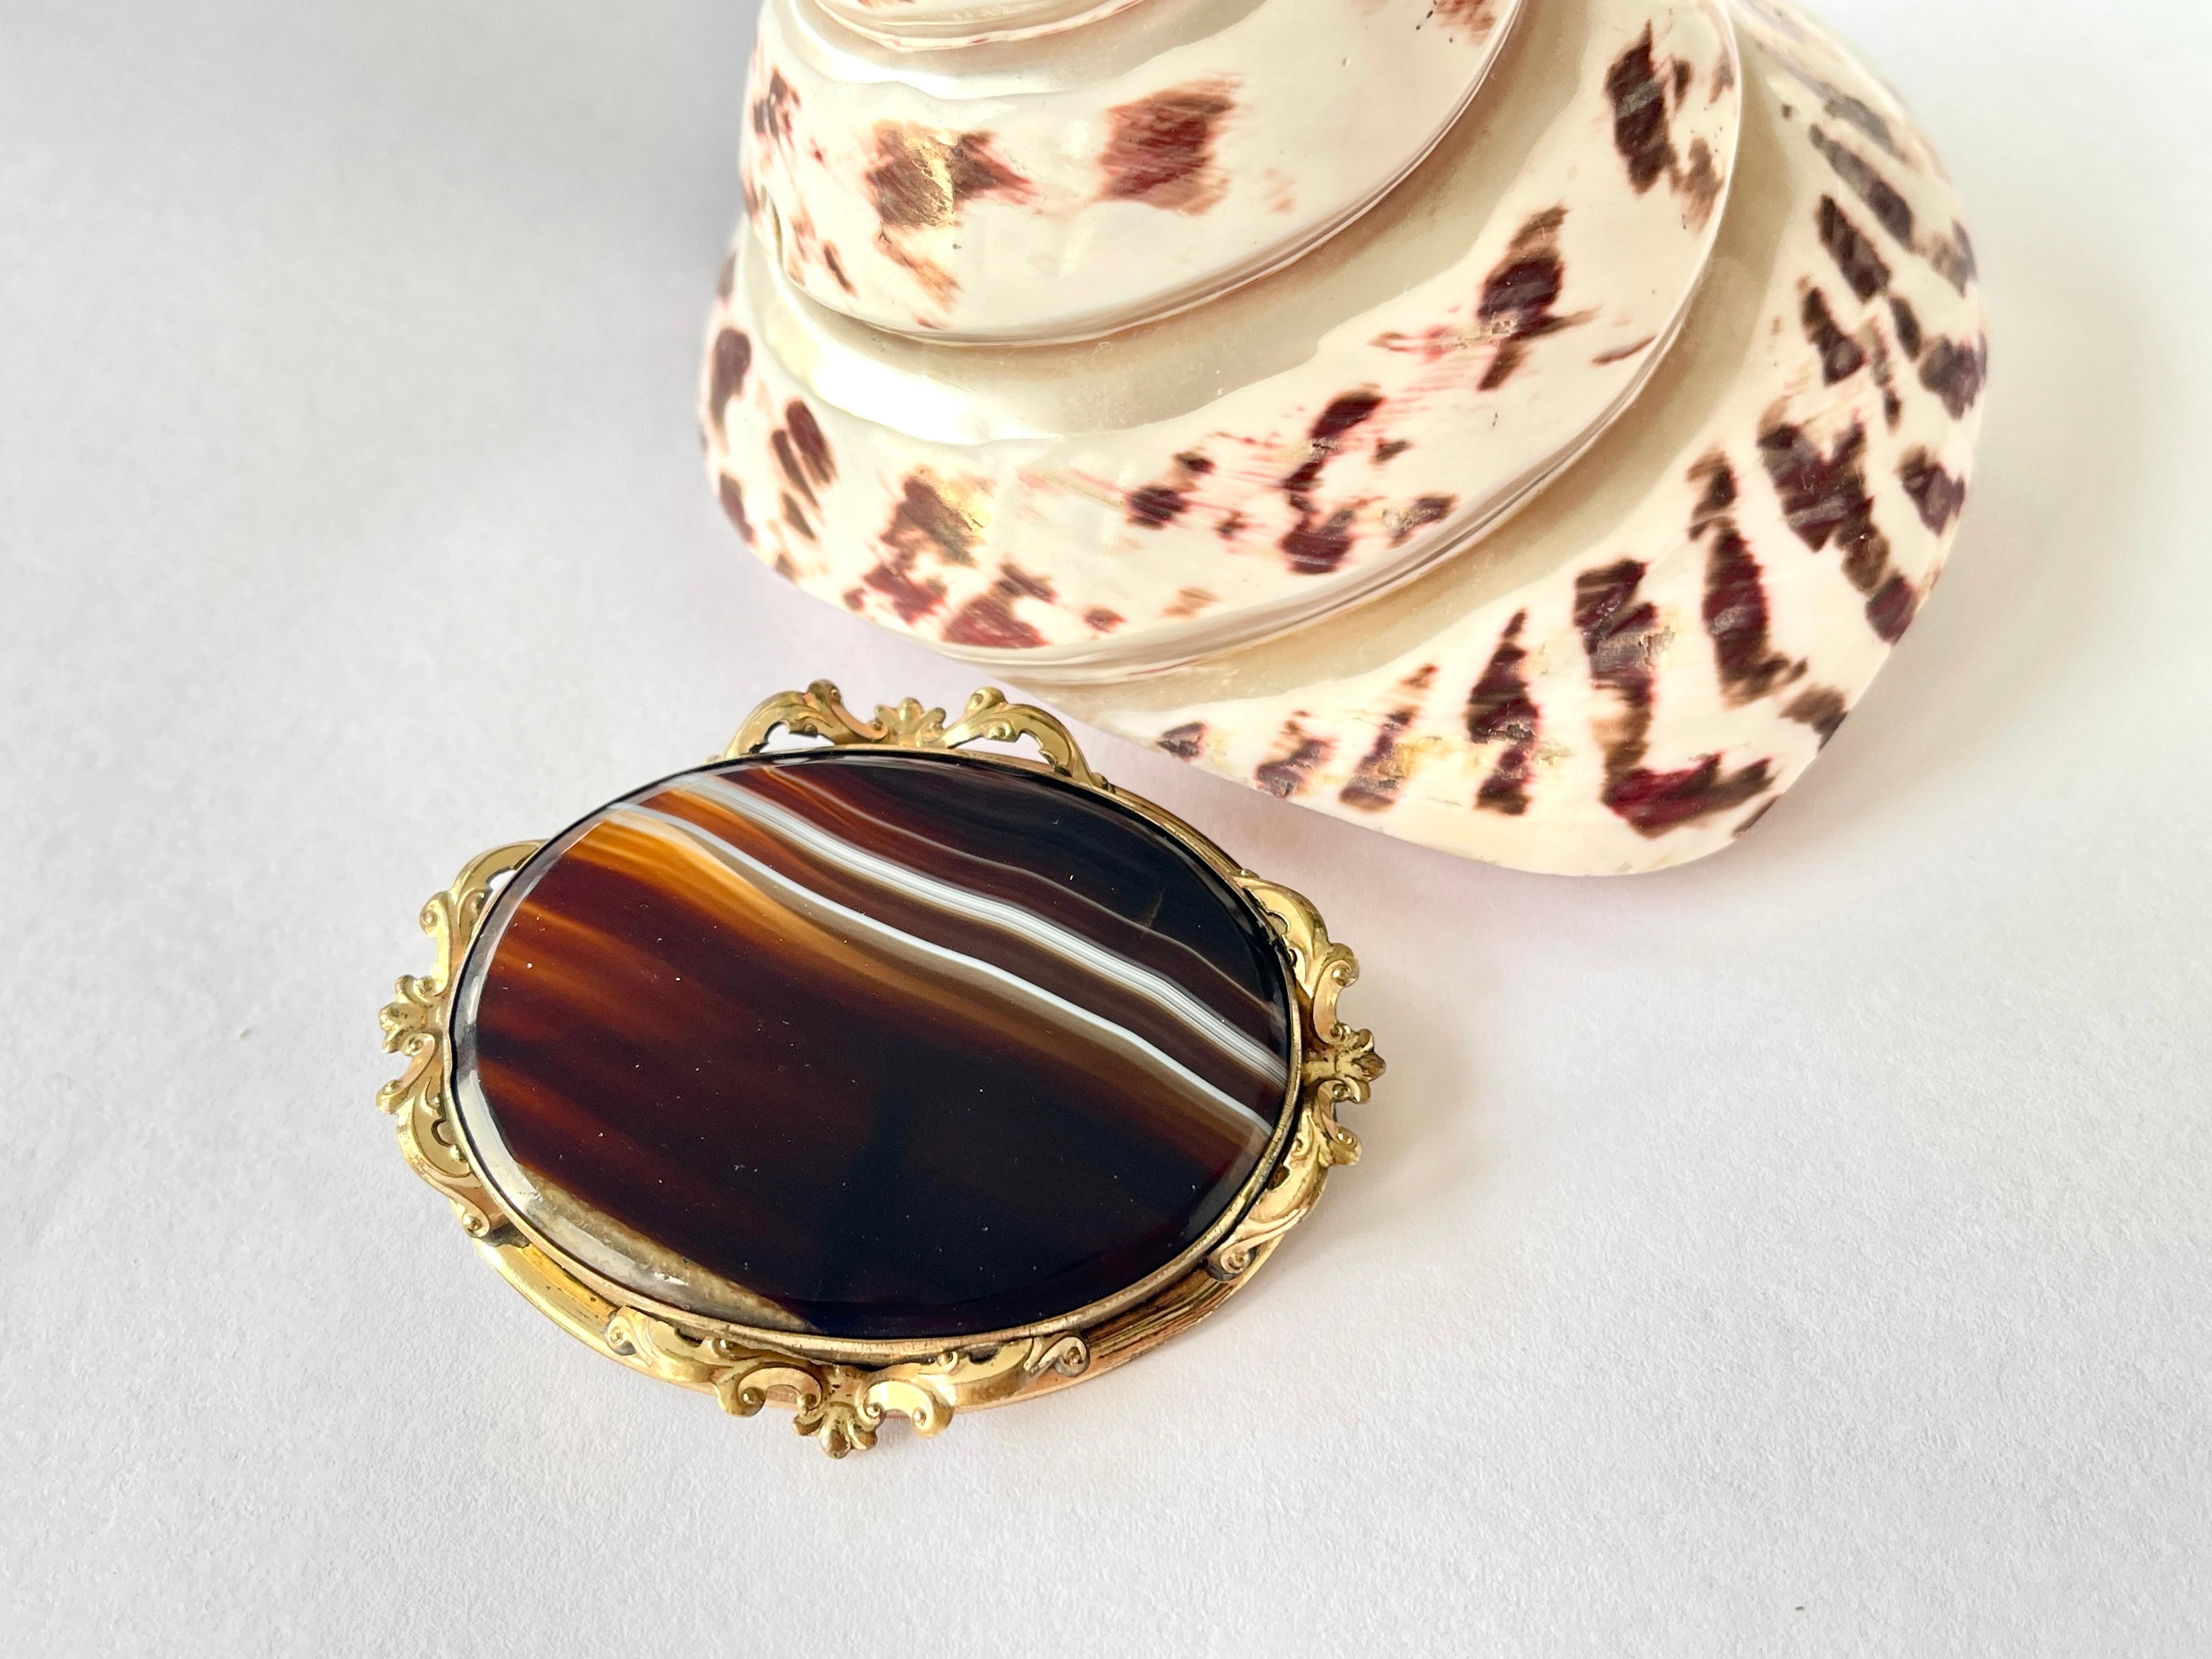 Women's Large Antique Victorian Banded Agate Brooch c1890s Gold Gilt Good Condition For Sale